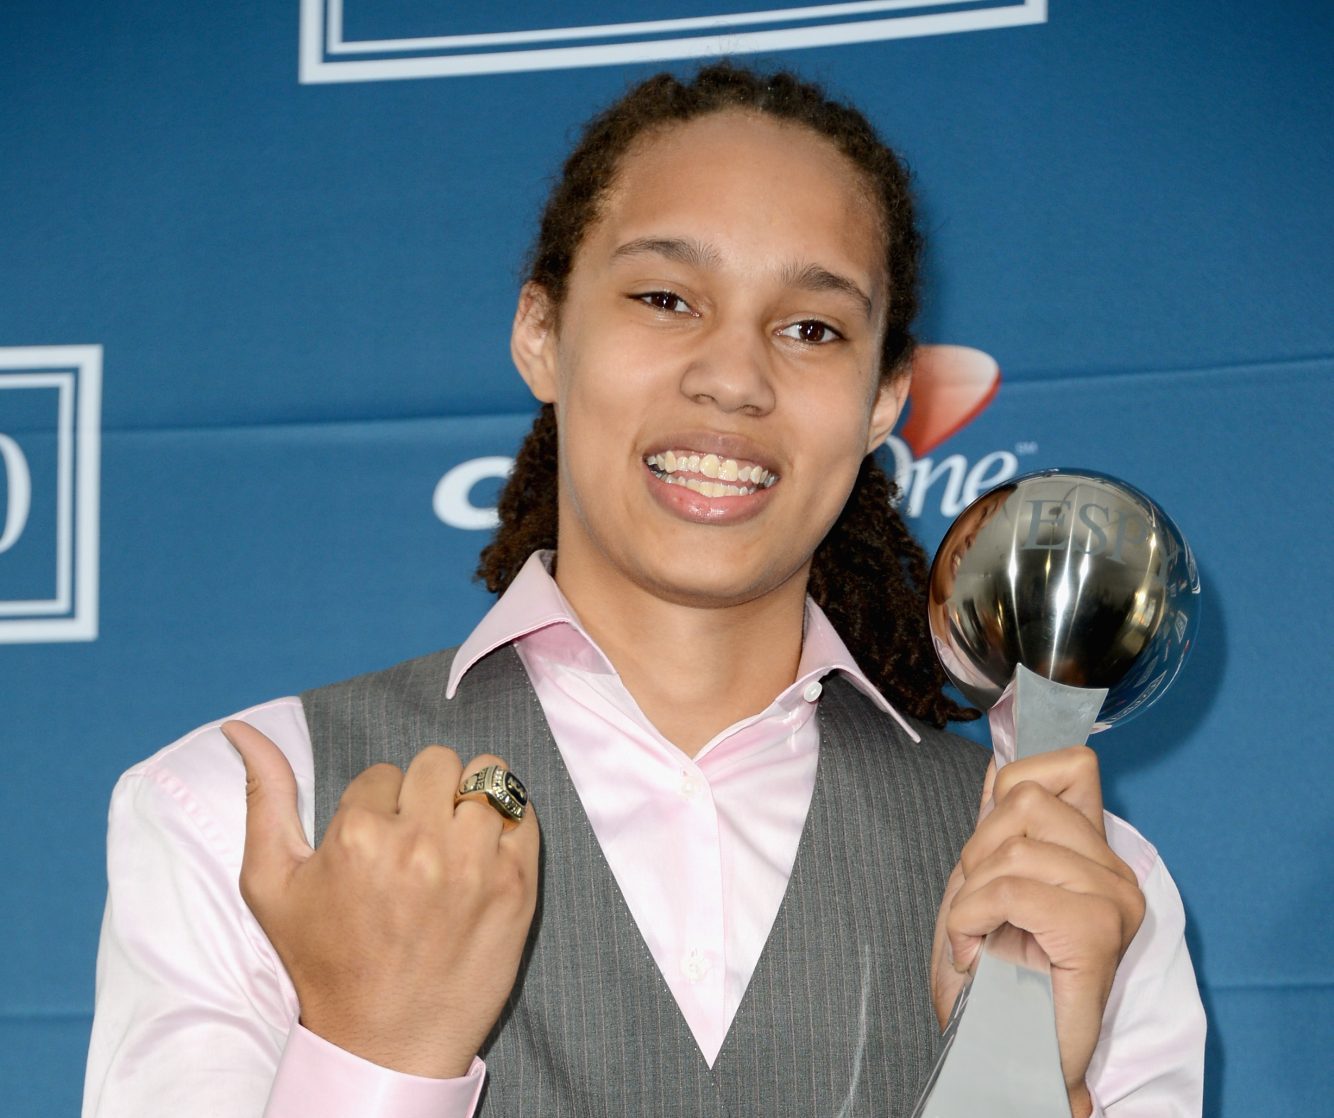 Russia's Ready To Discuss Prisoner Swap One Day After Brittney Griner's Nine Year Conviction